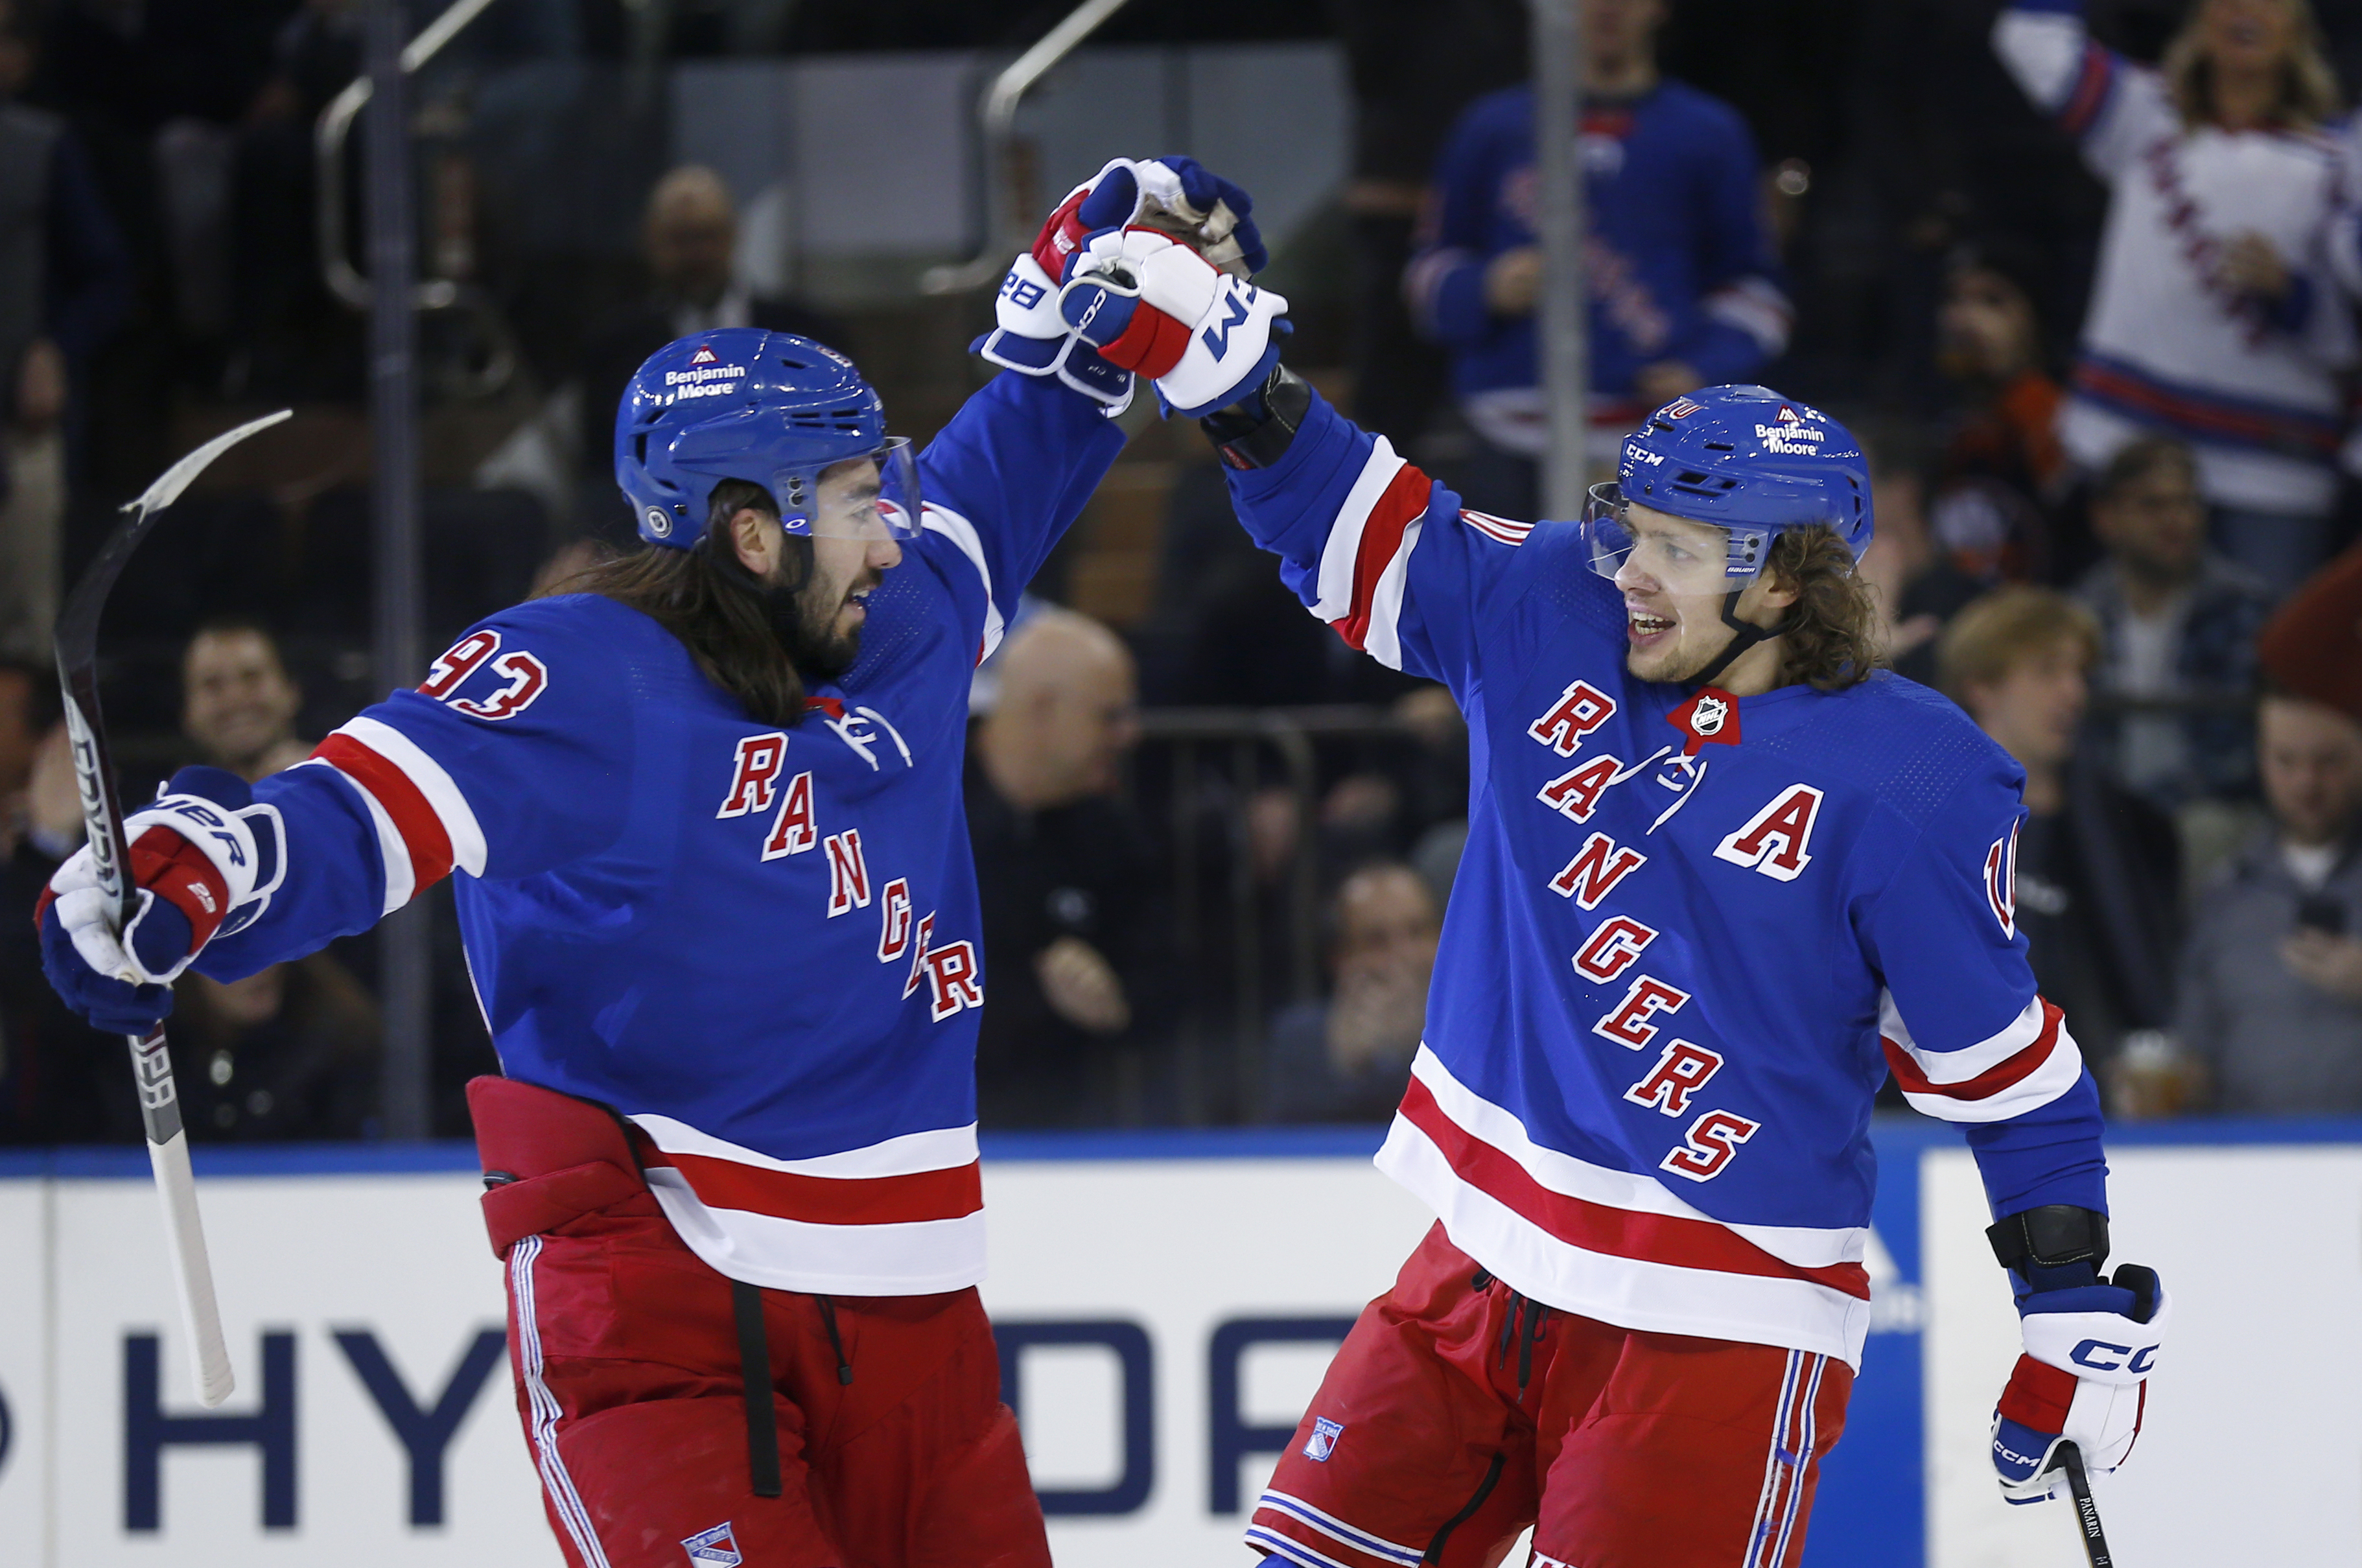 Rangers vs. Devils live stream: TV channel, how to watch